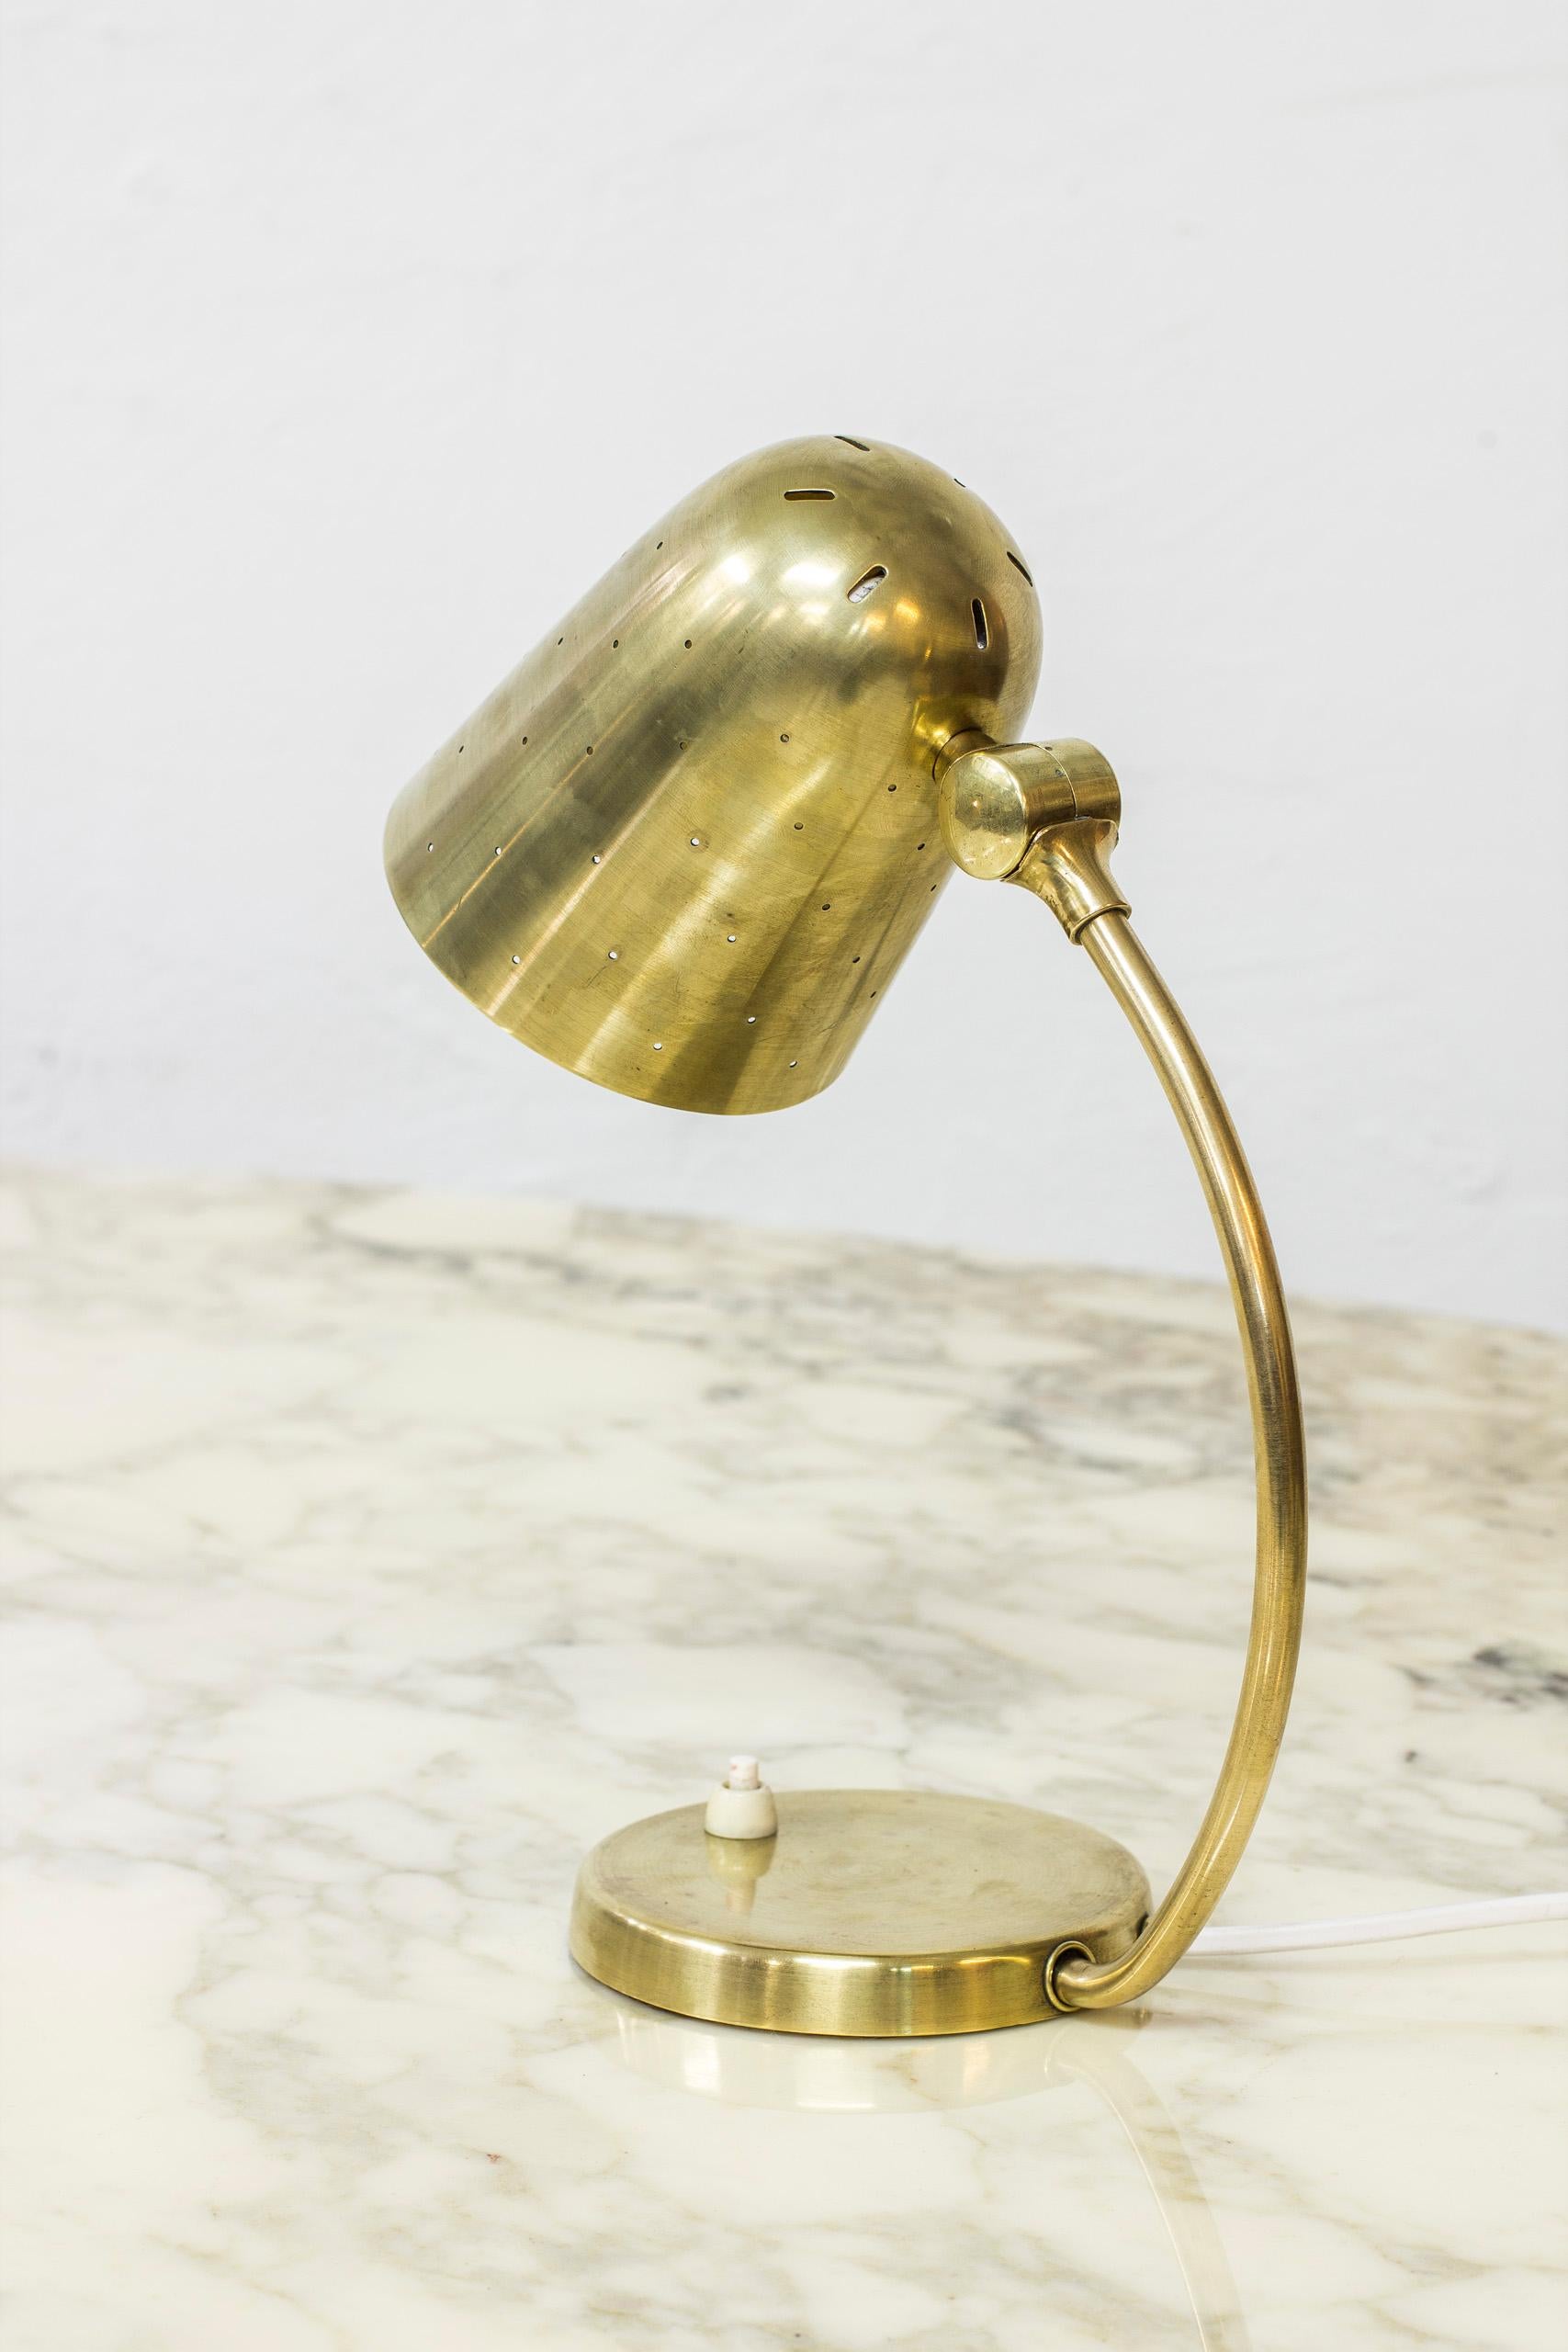 Table lamp made from solid brass produced by Boréns. Made in Sweden during the 1940s-1950s. Shade adjustable. Light switch on the lamp base in working order. Good vintage condition with some age related patina from wear and use.

 